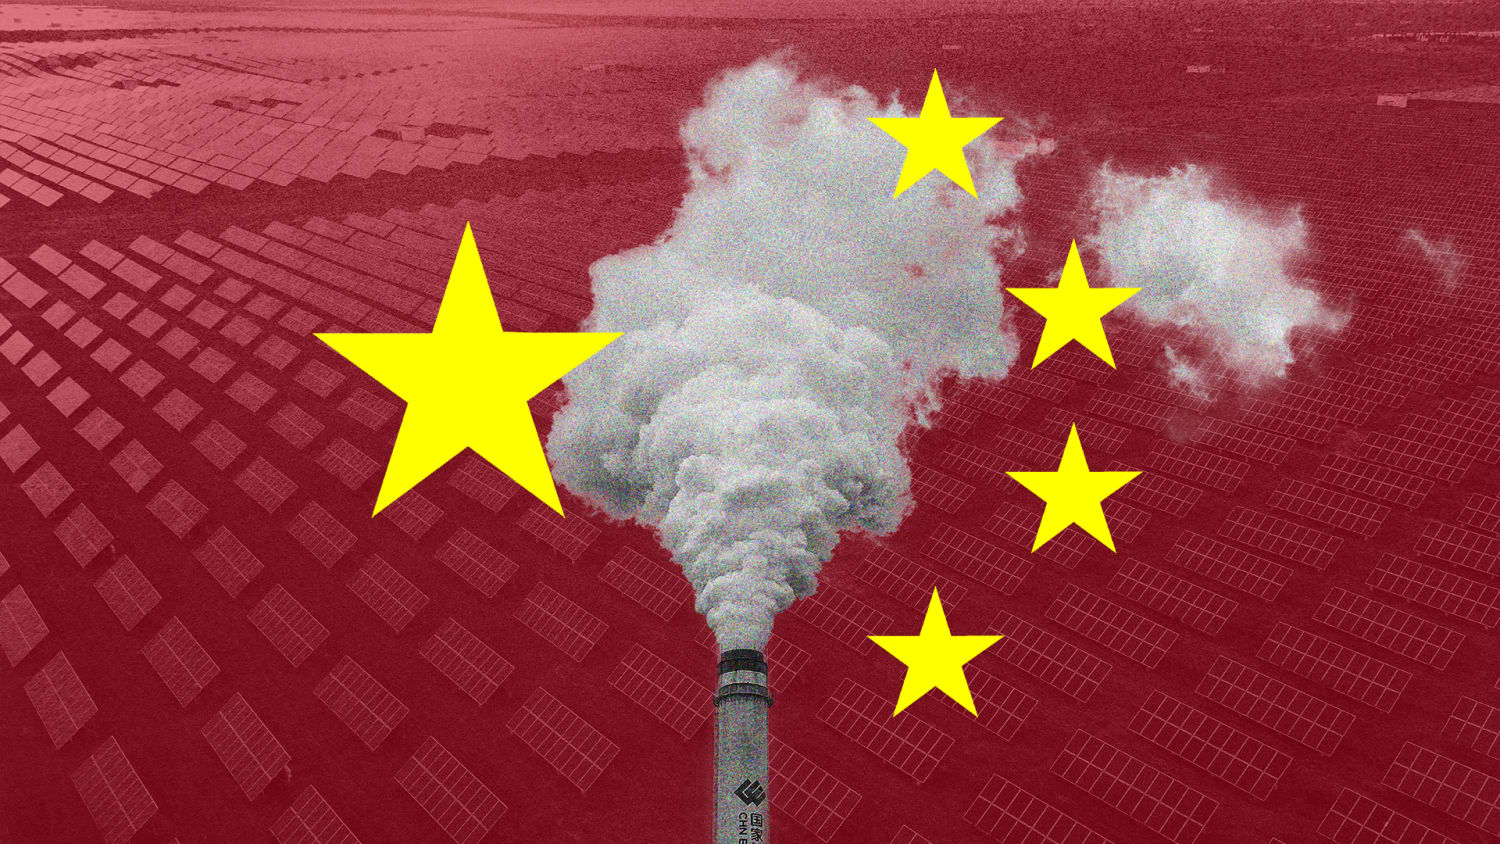 China is addicted to dirty coal. Humanity’s future depends on it kicking the habit.